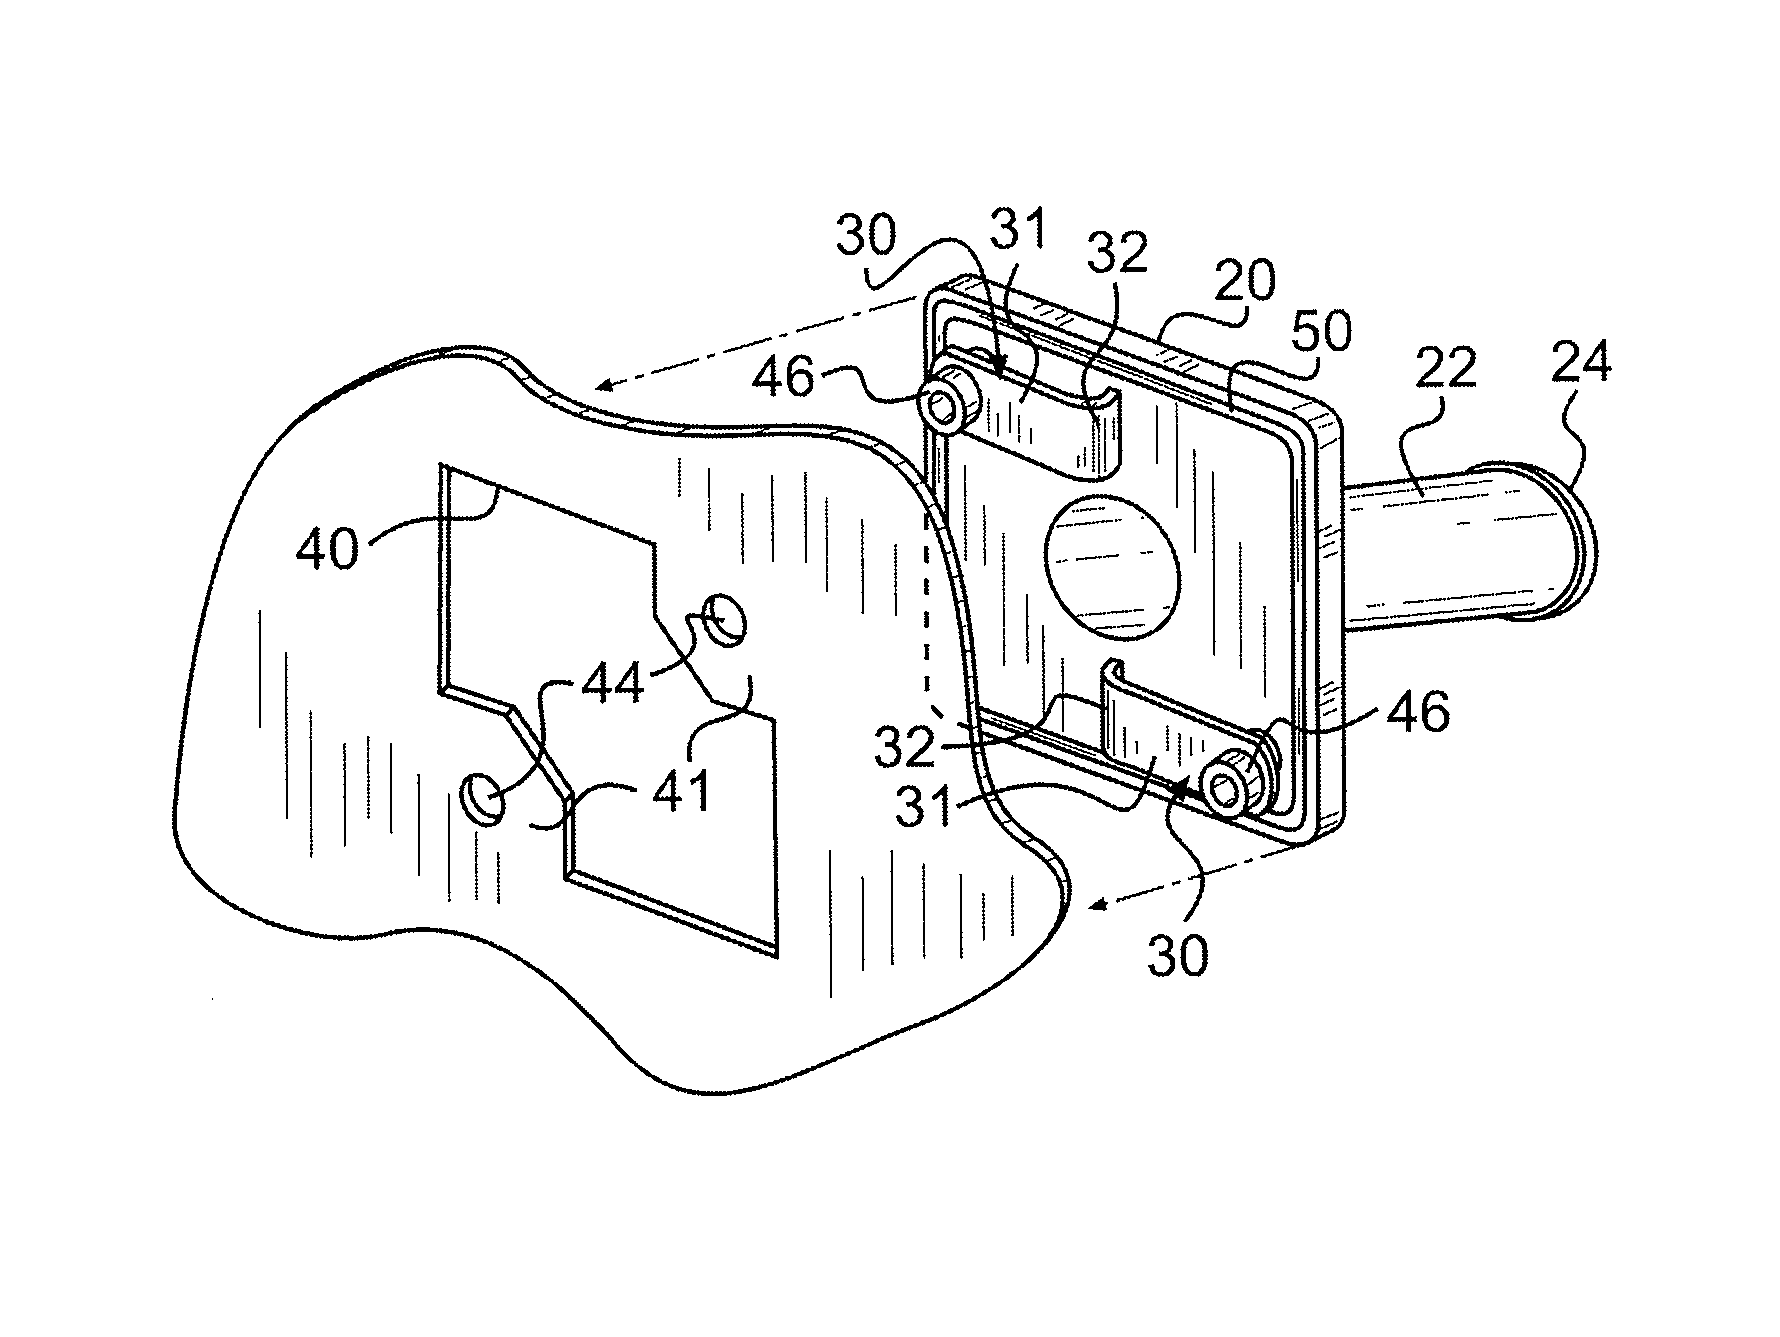 Washer/extractor with plastic hose connecting fitting